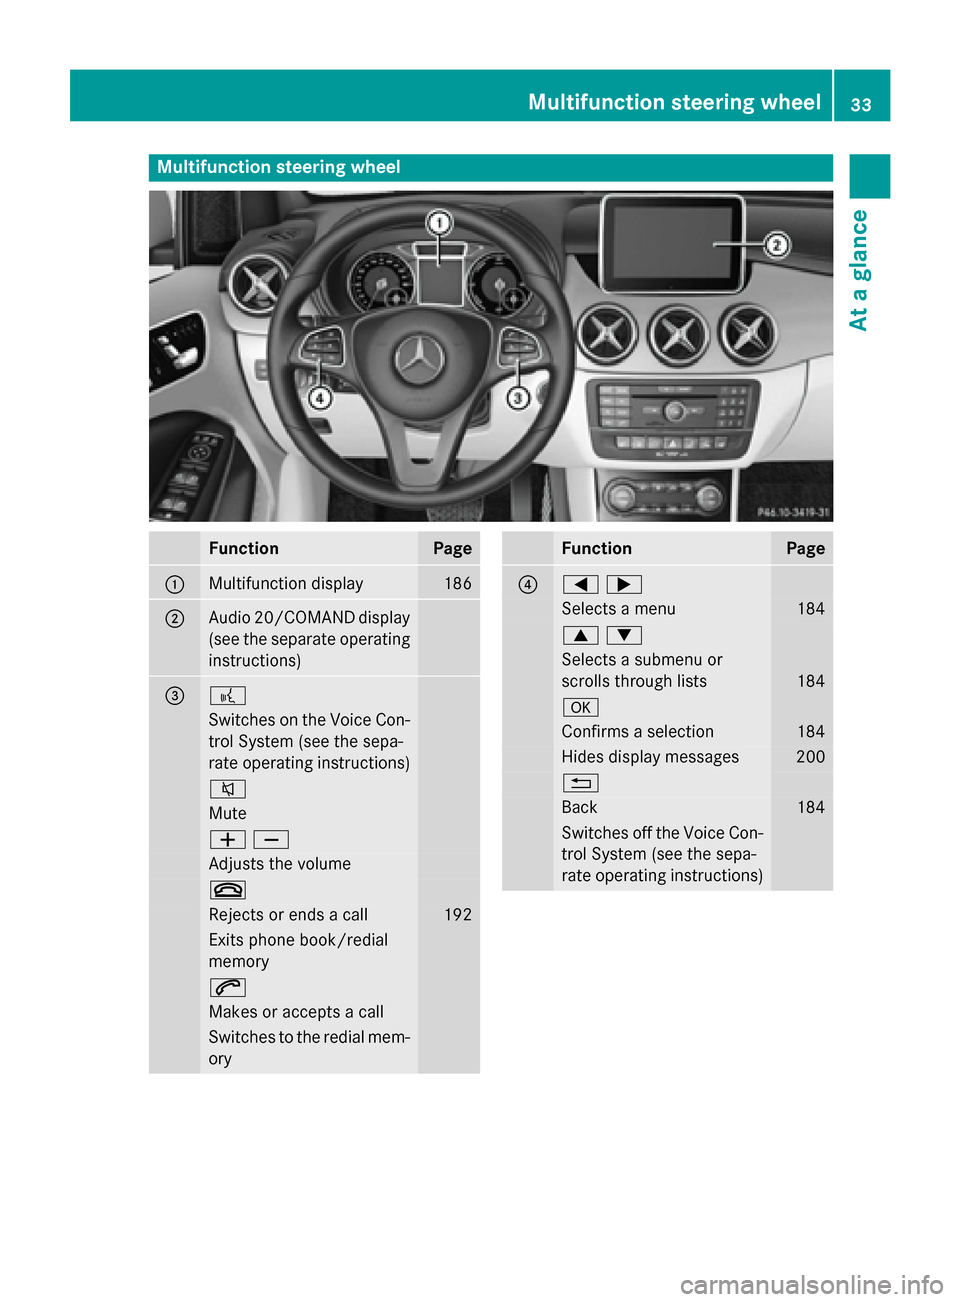 MERCEDES-BENZ B-Class ELECTRIC 2015 W246 Owners Guide Multifunction steering wheel
Function Page
:
Multifunction display 186
;
Audio 20/COMAND display
(see the separate operating
instructions) = ?
Switches on the Voice Con-
trol System (see the sepa-
rat